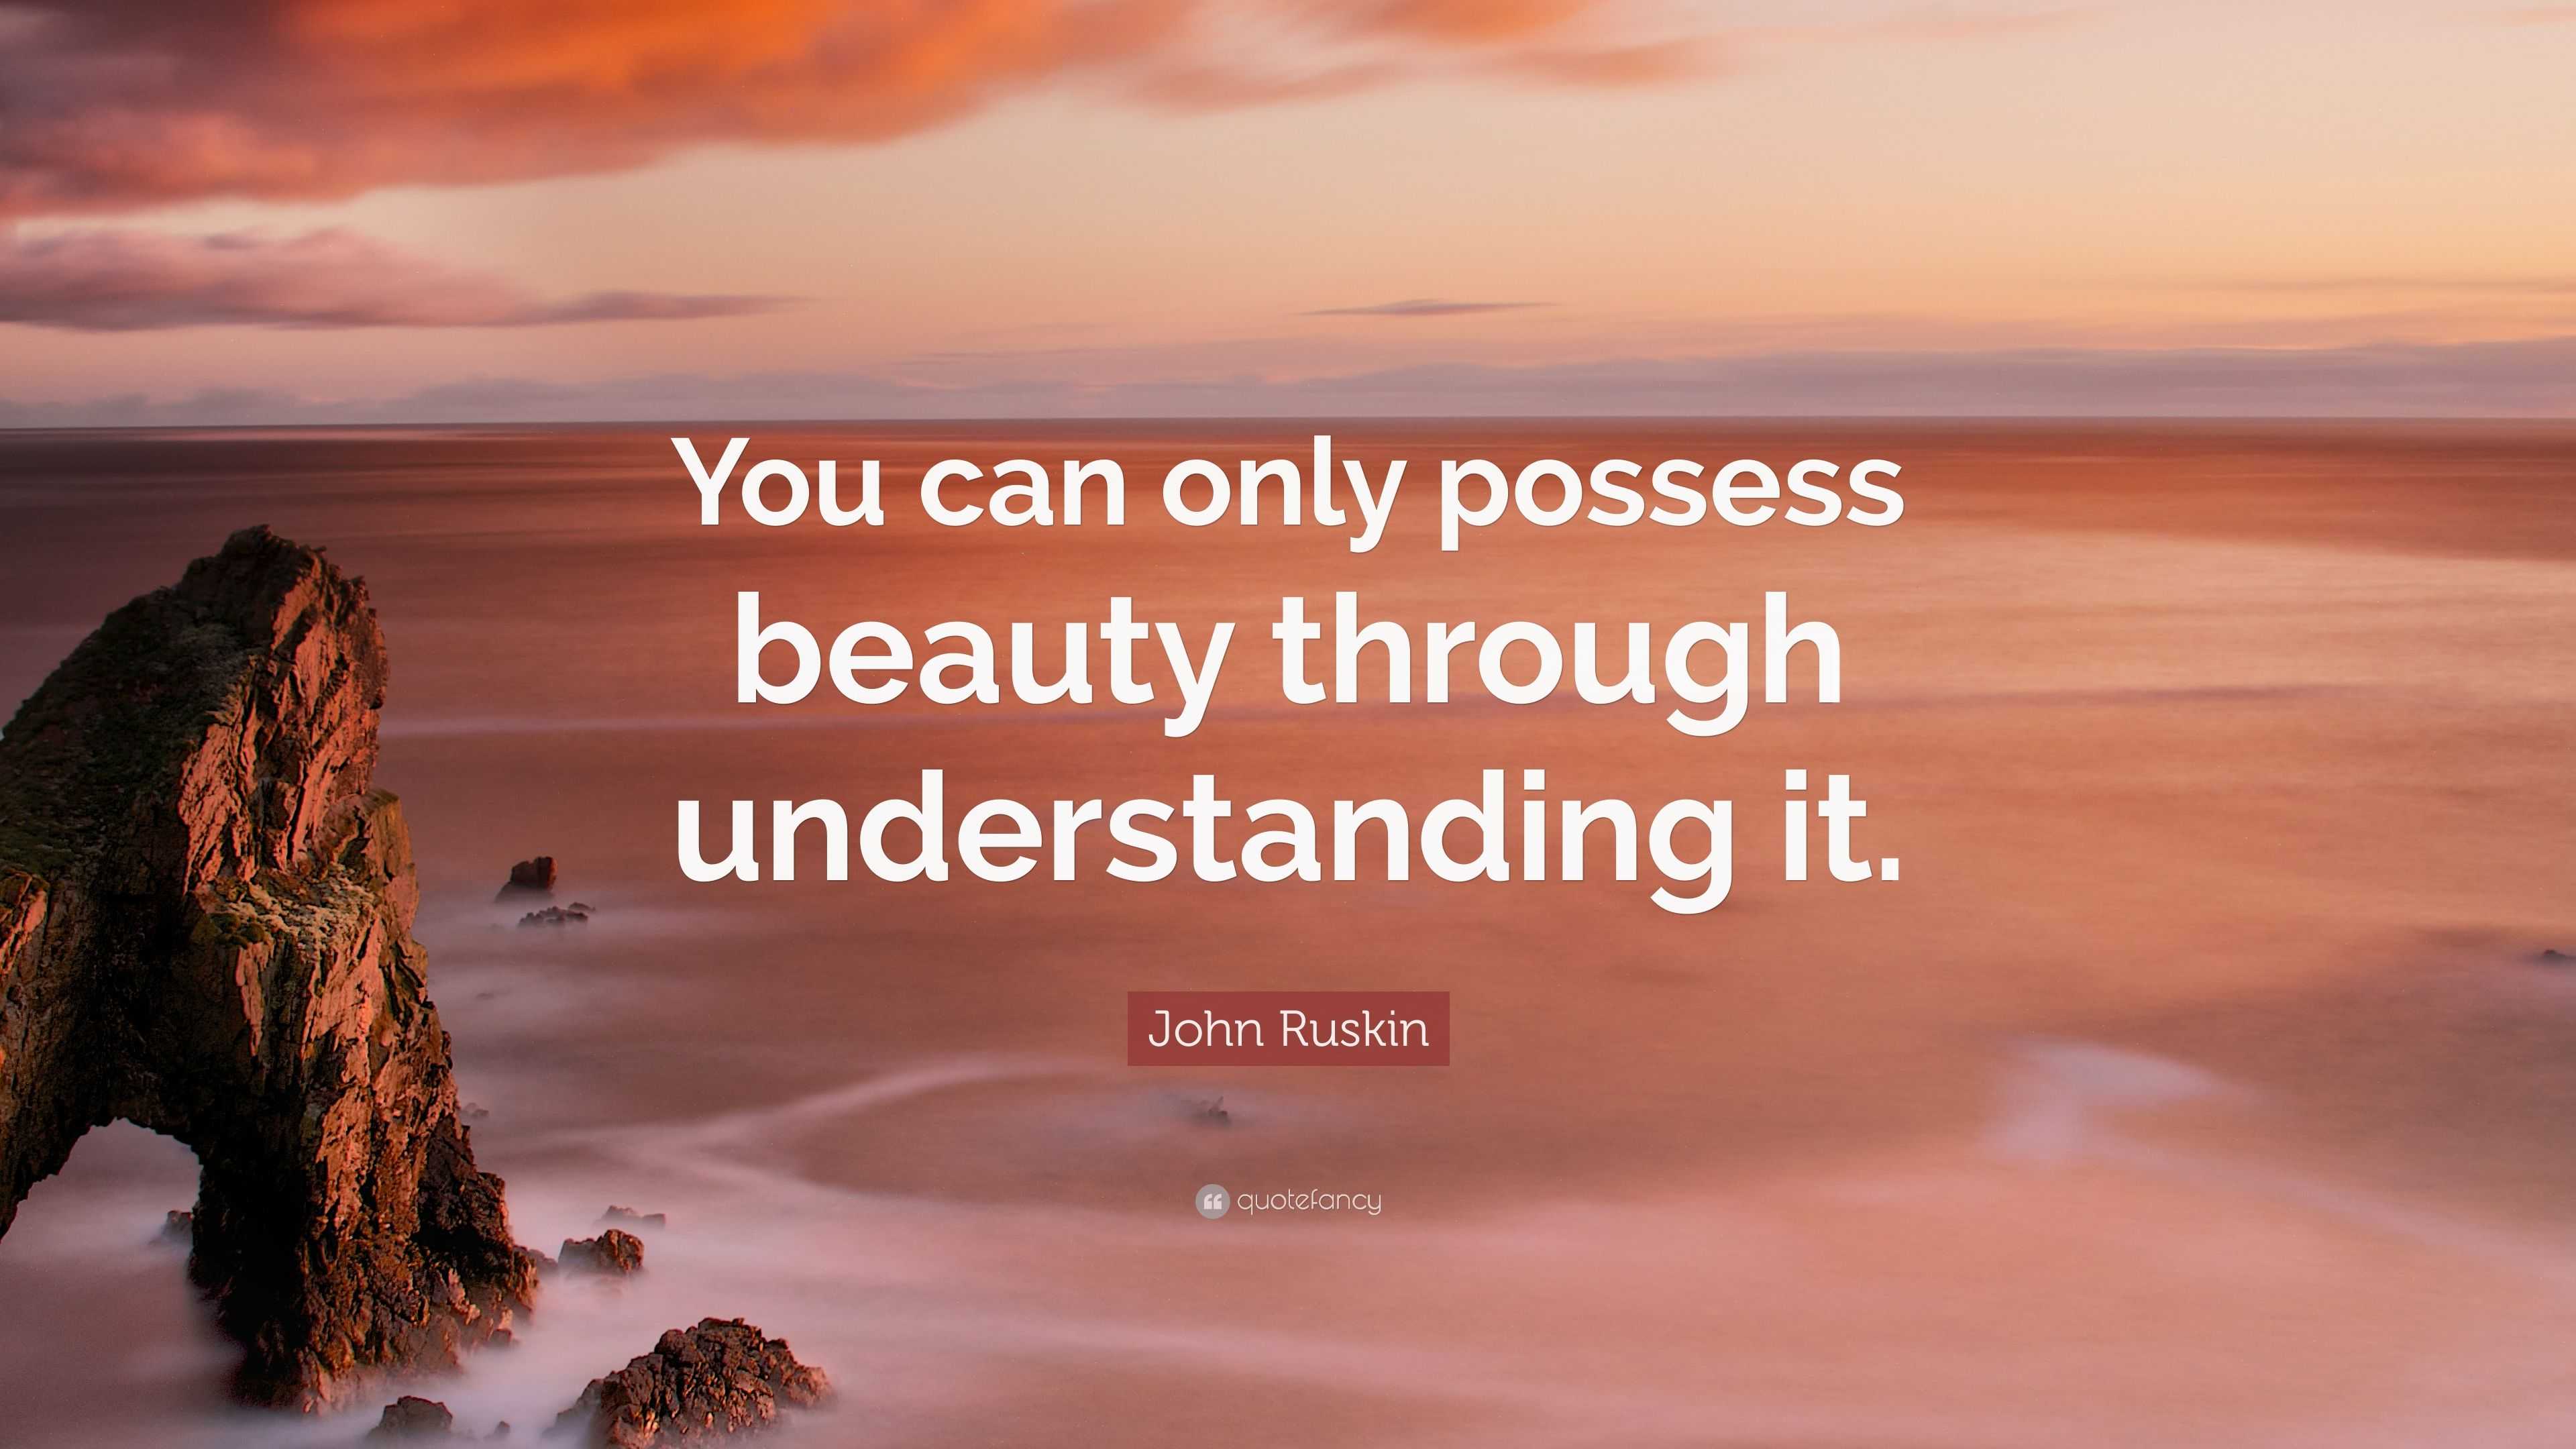 John Ruskin Quote: “You can only possess beauty through understanding it.”